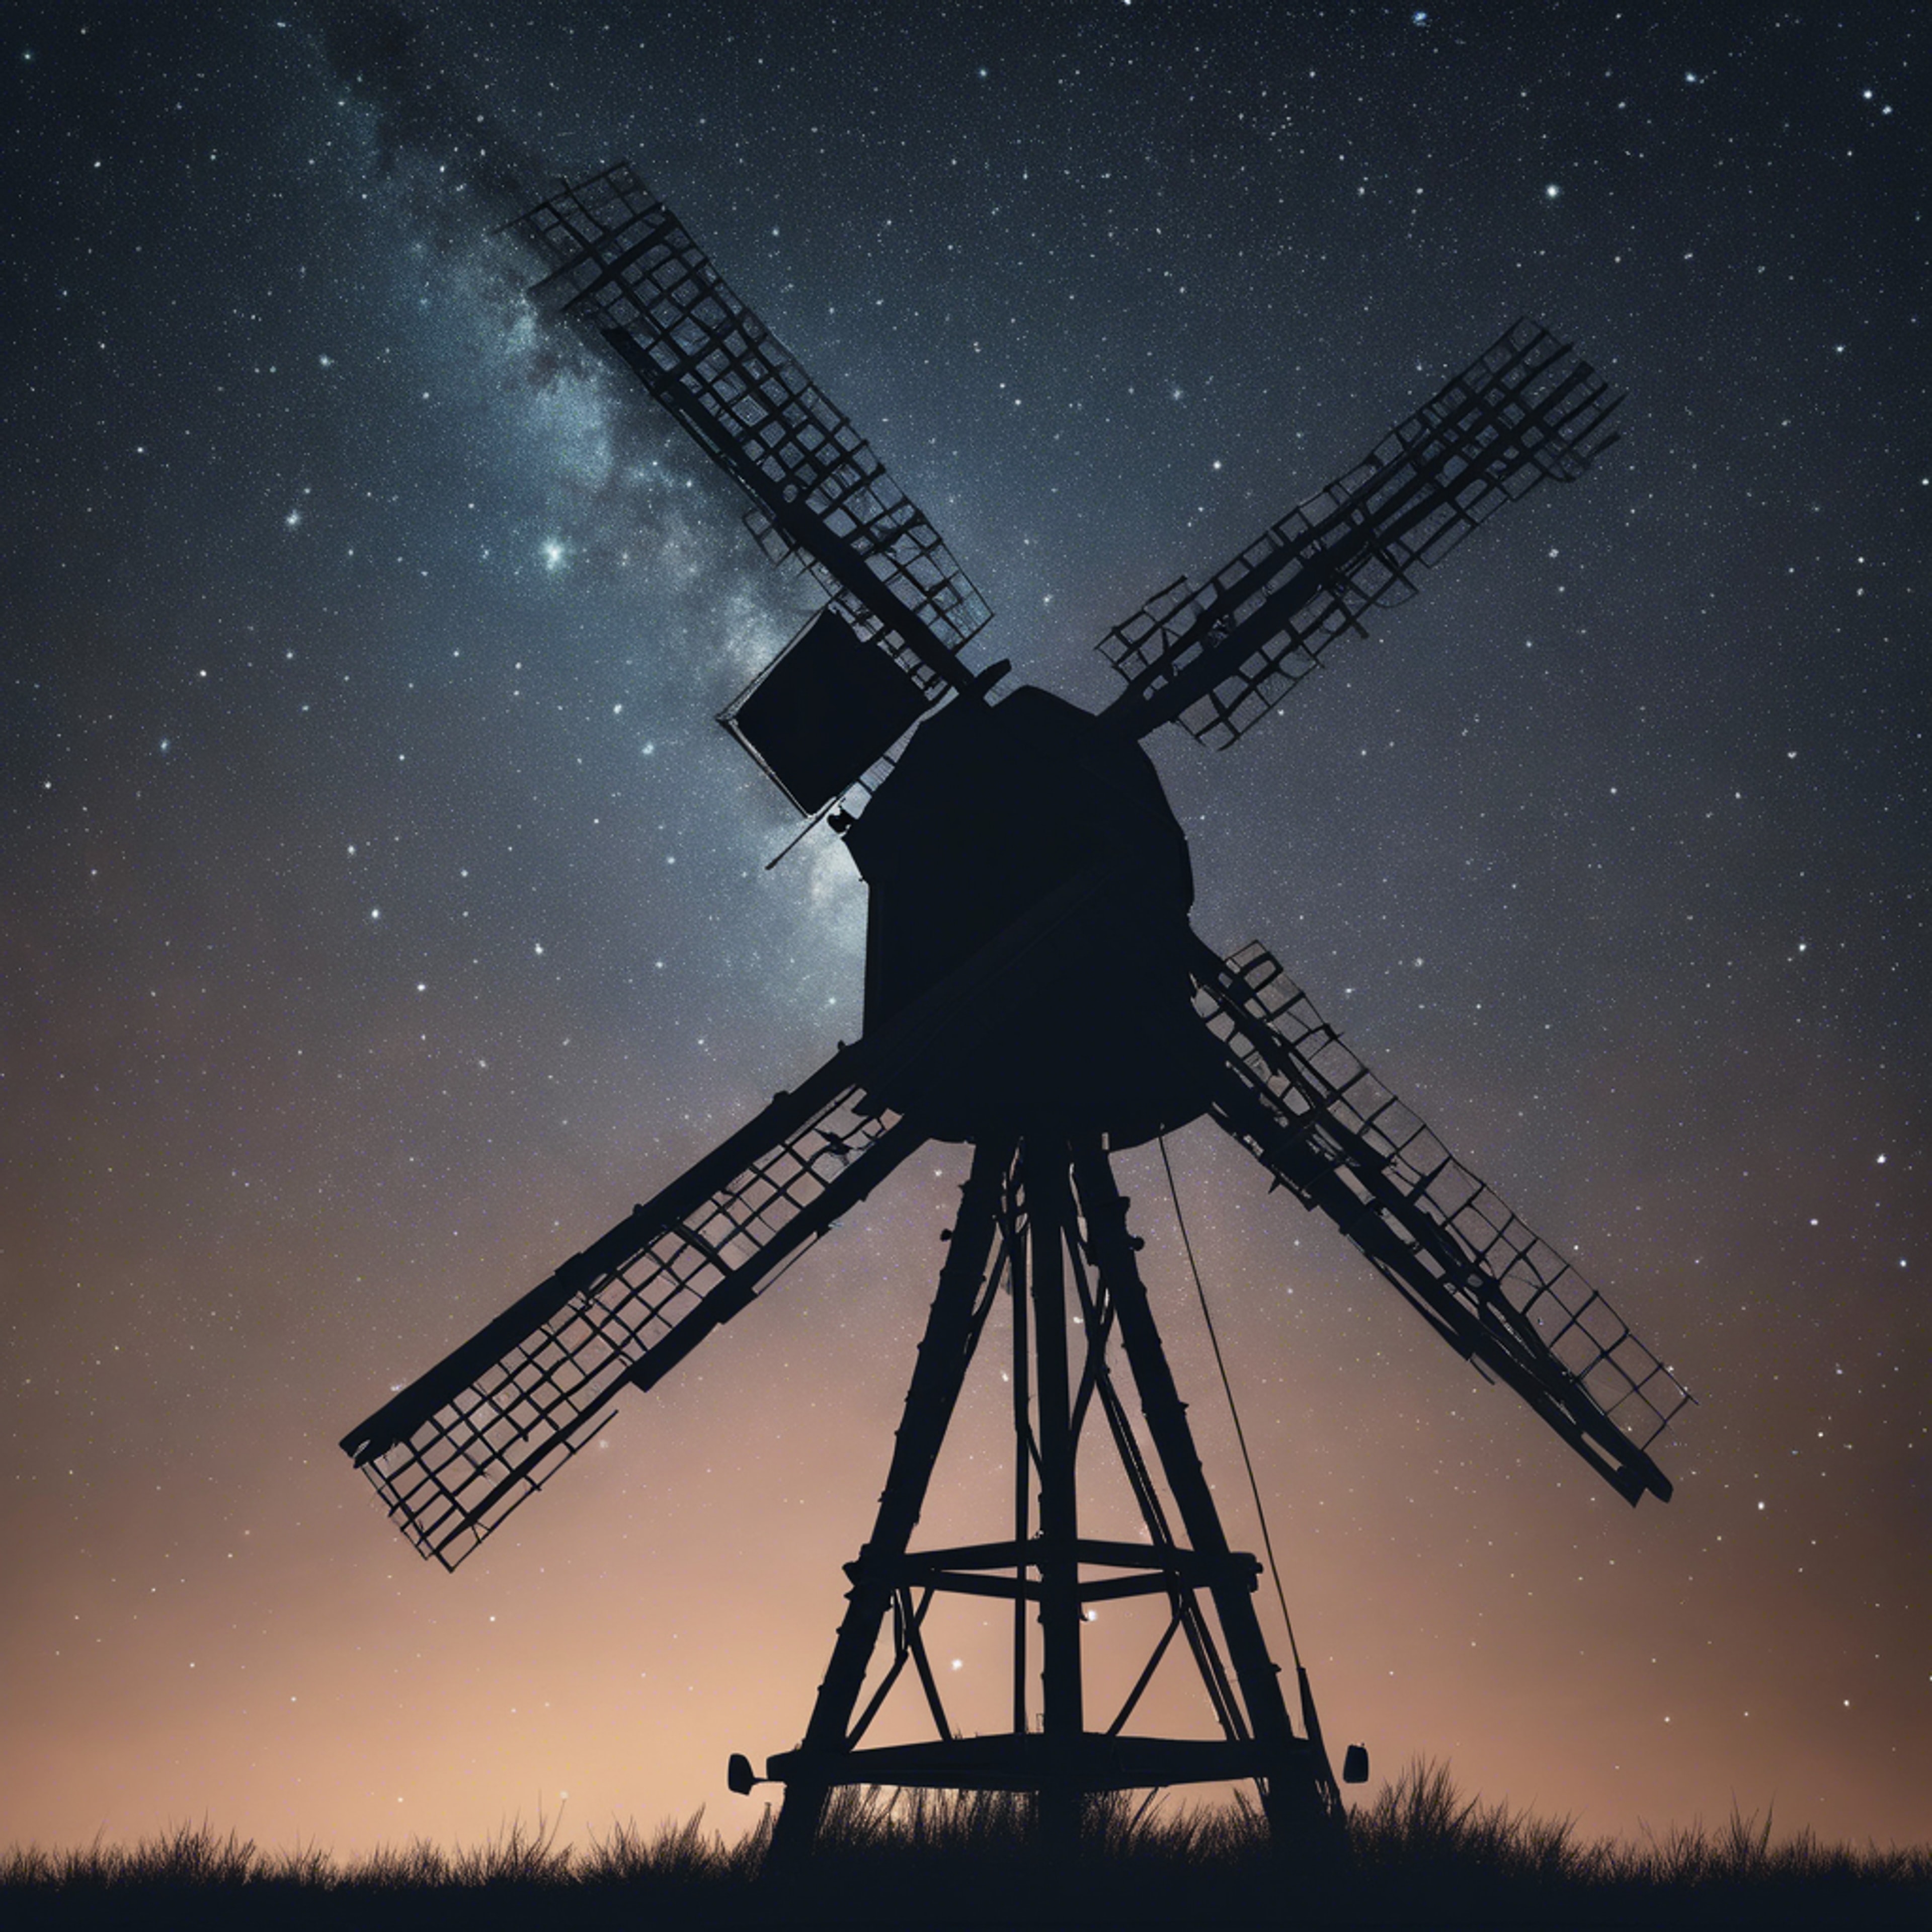 A silhouette of a traditional windmill against a mesmerizing starry night sky. Papel de parede[d821762278f94928b618]